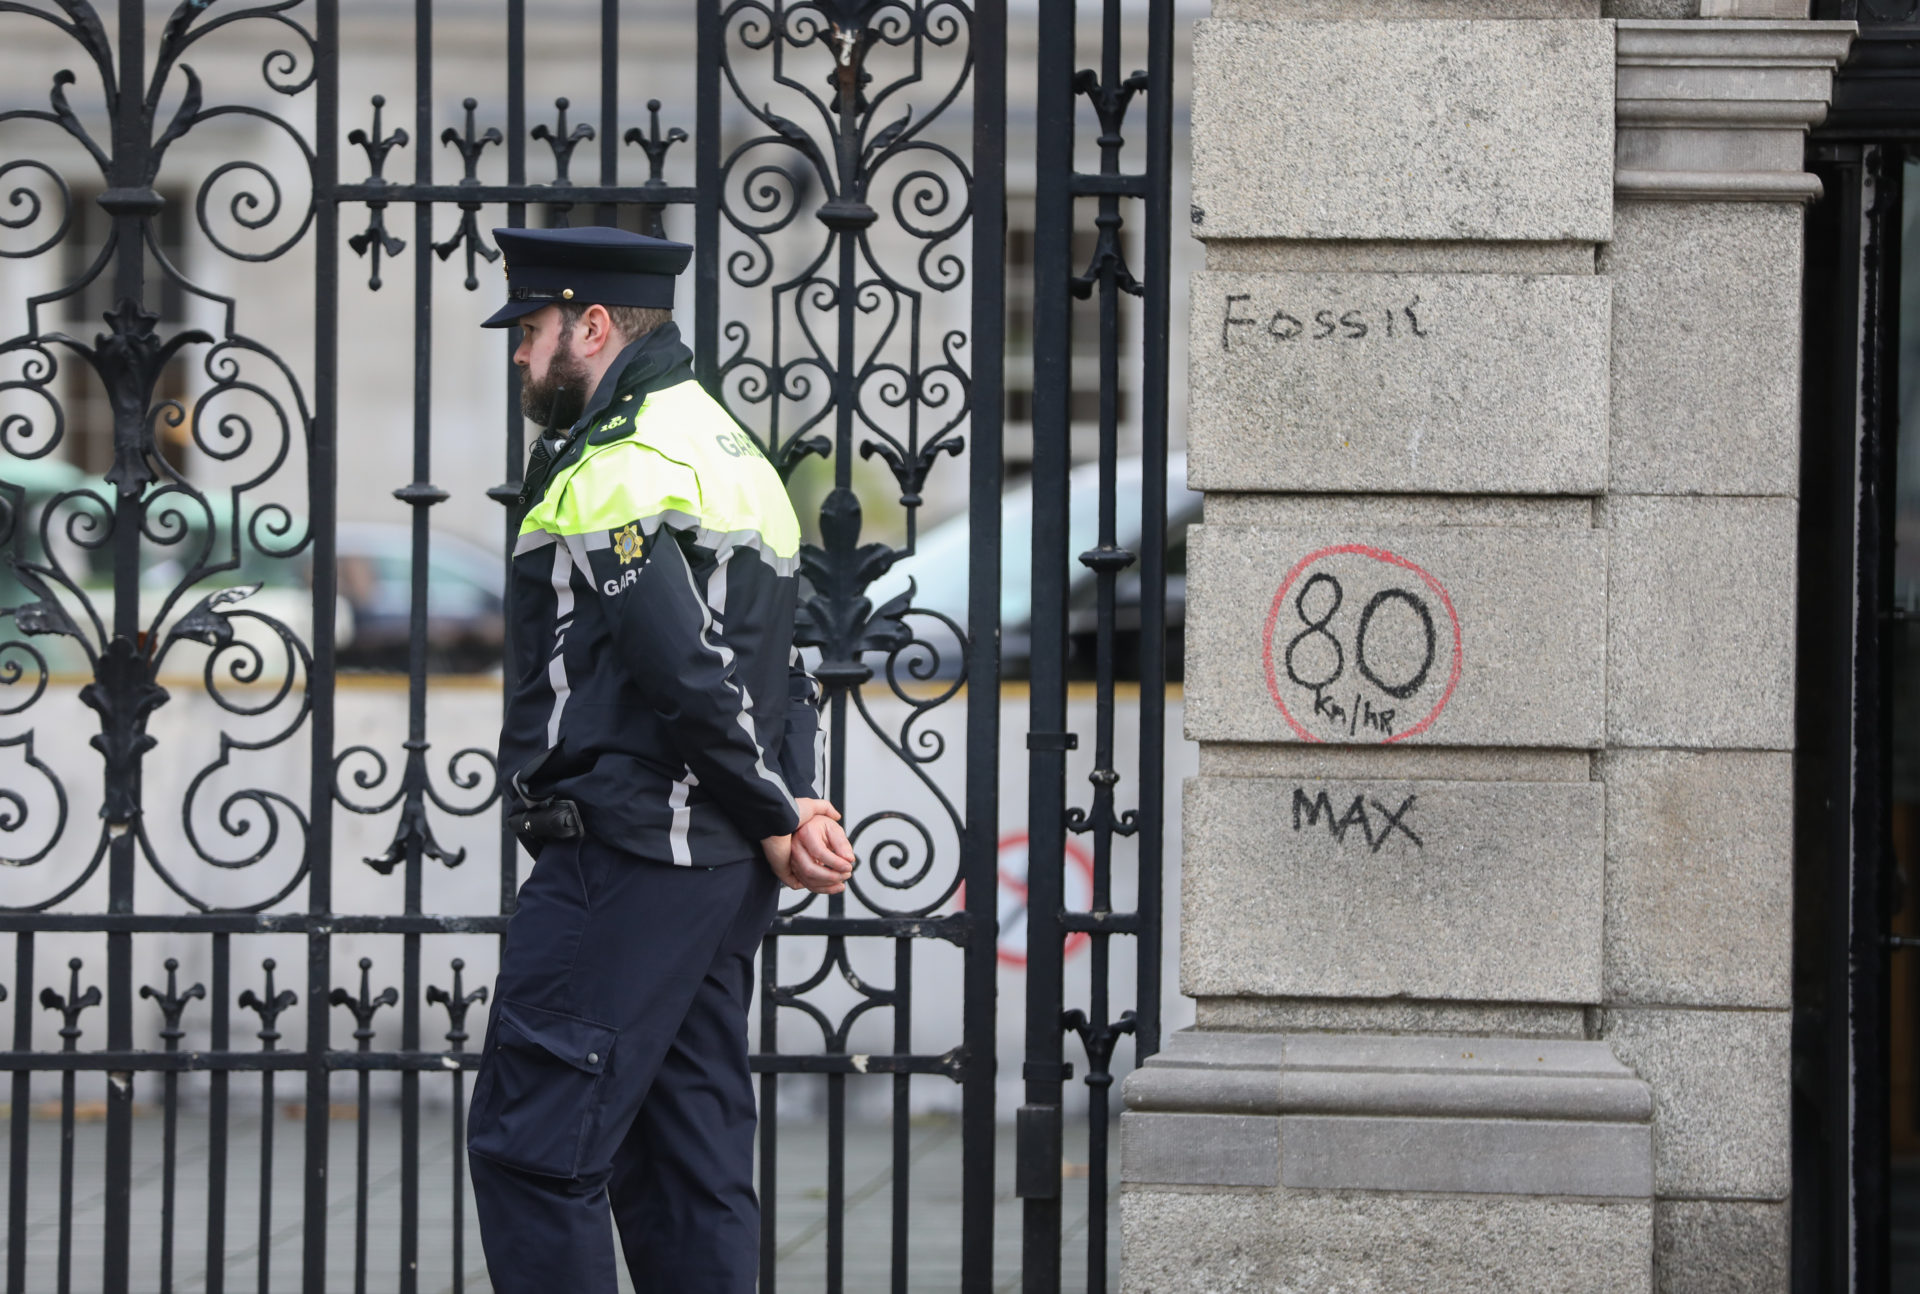 Graffiti protesting climate change was scrawled on the wall outside Leinster House today, 11-11-2022. Image: Leah Farell/RollingNews 